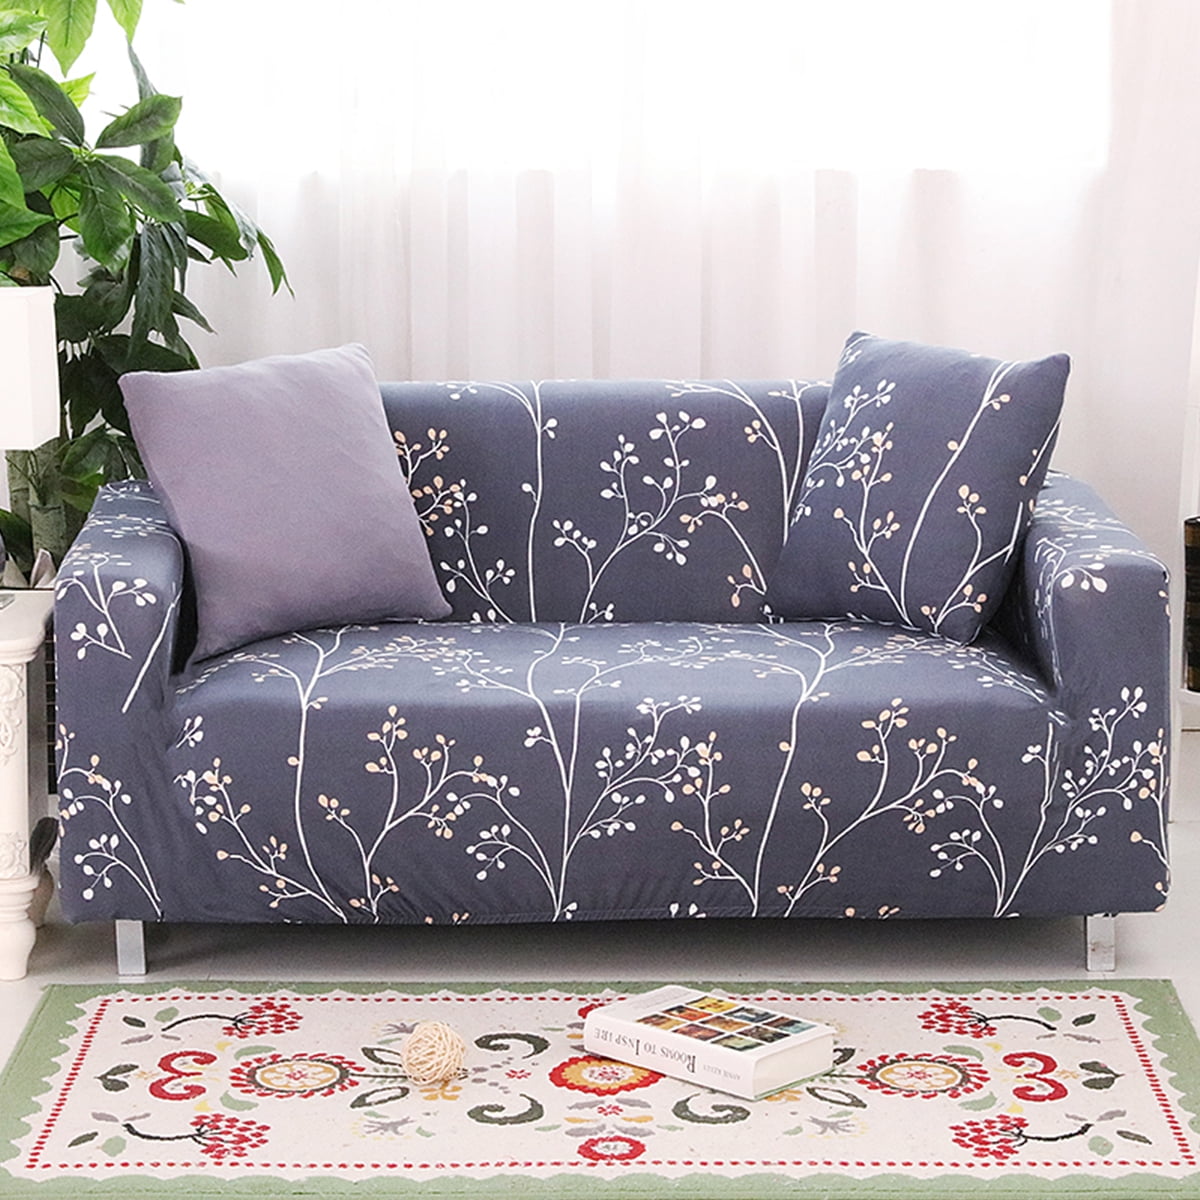 Details about   1-4 Seater Printed Slipcover Sofa Covers Spandex Stretch  Protect Living Room 